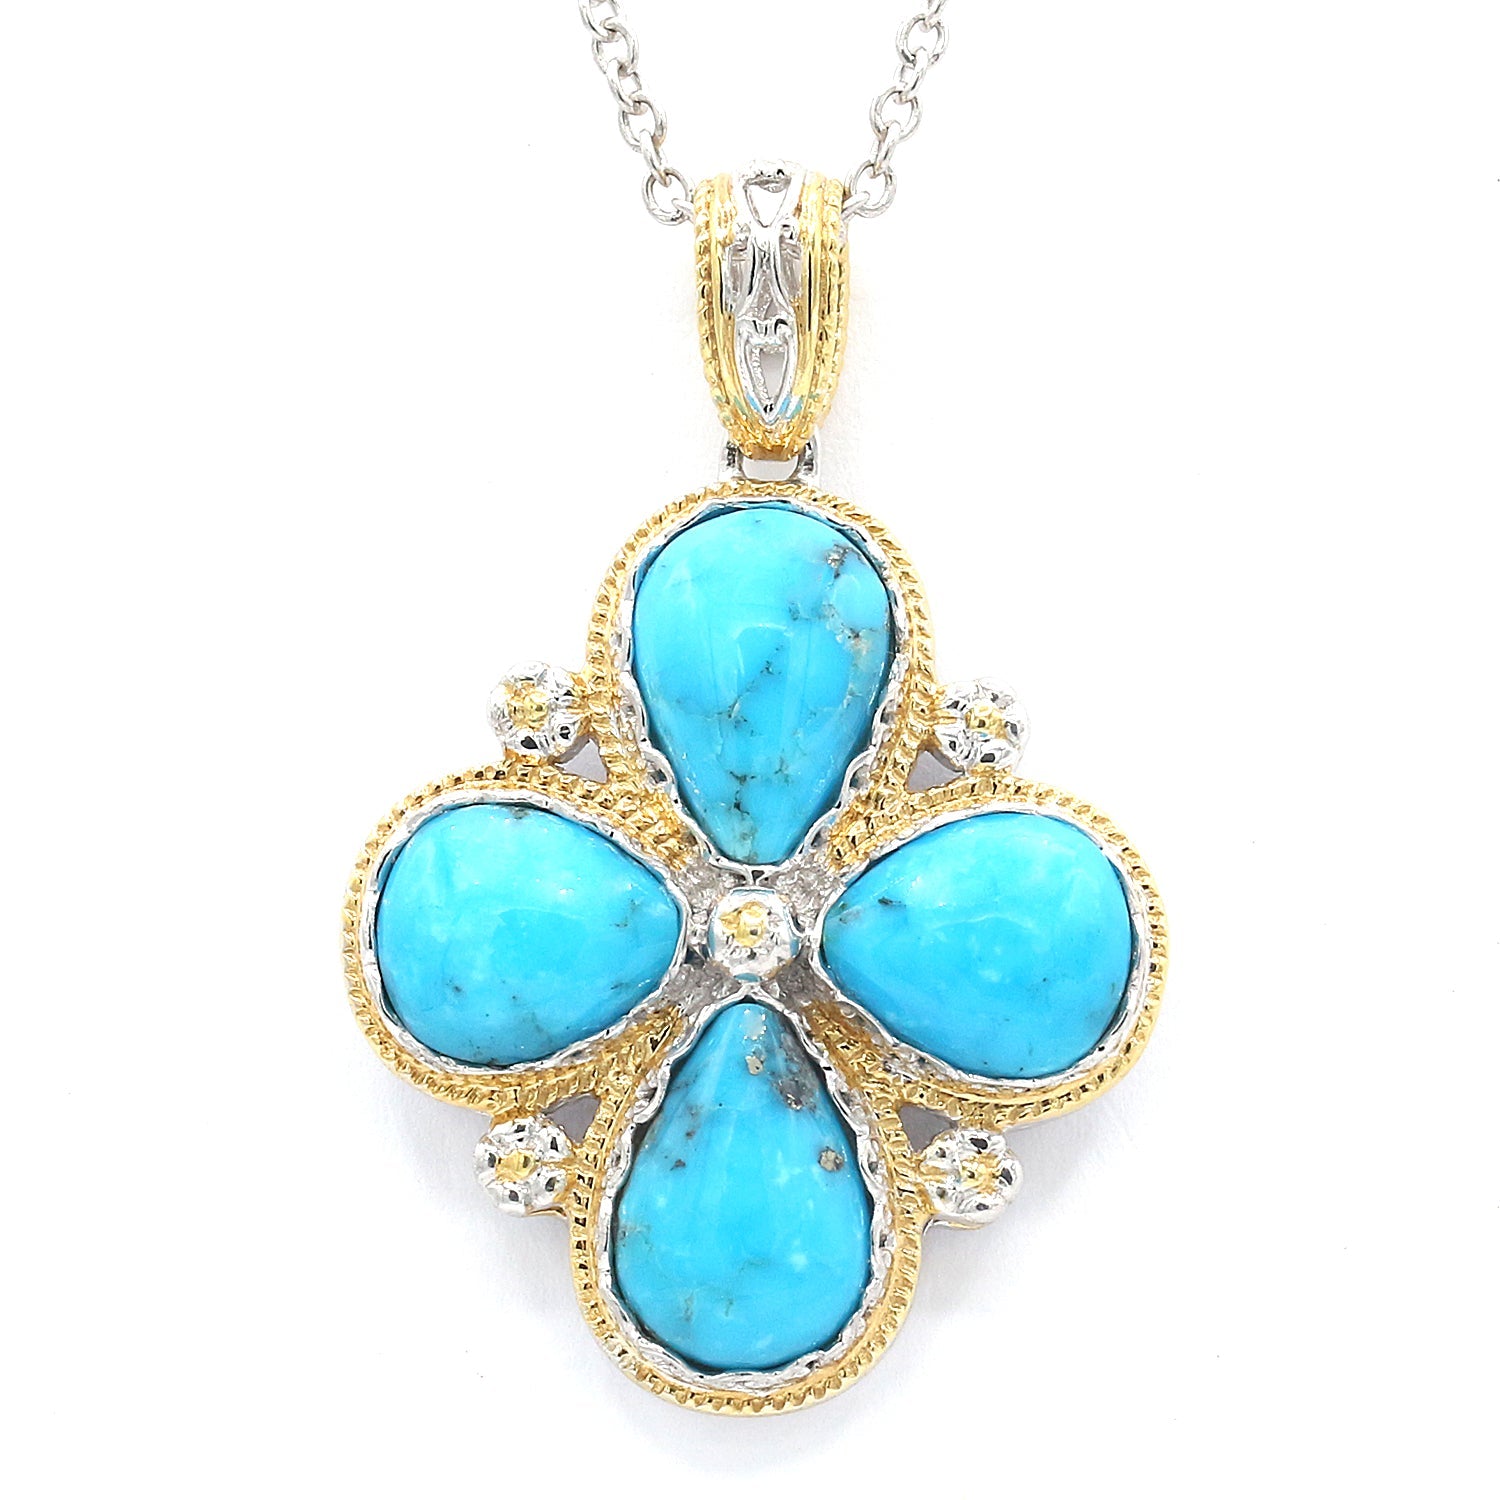 Buy The Turquoise Stone Flower Pendant Necklace